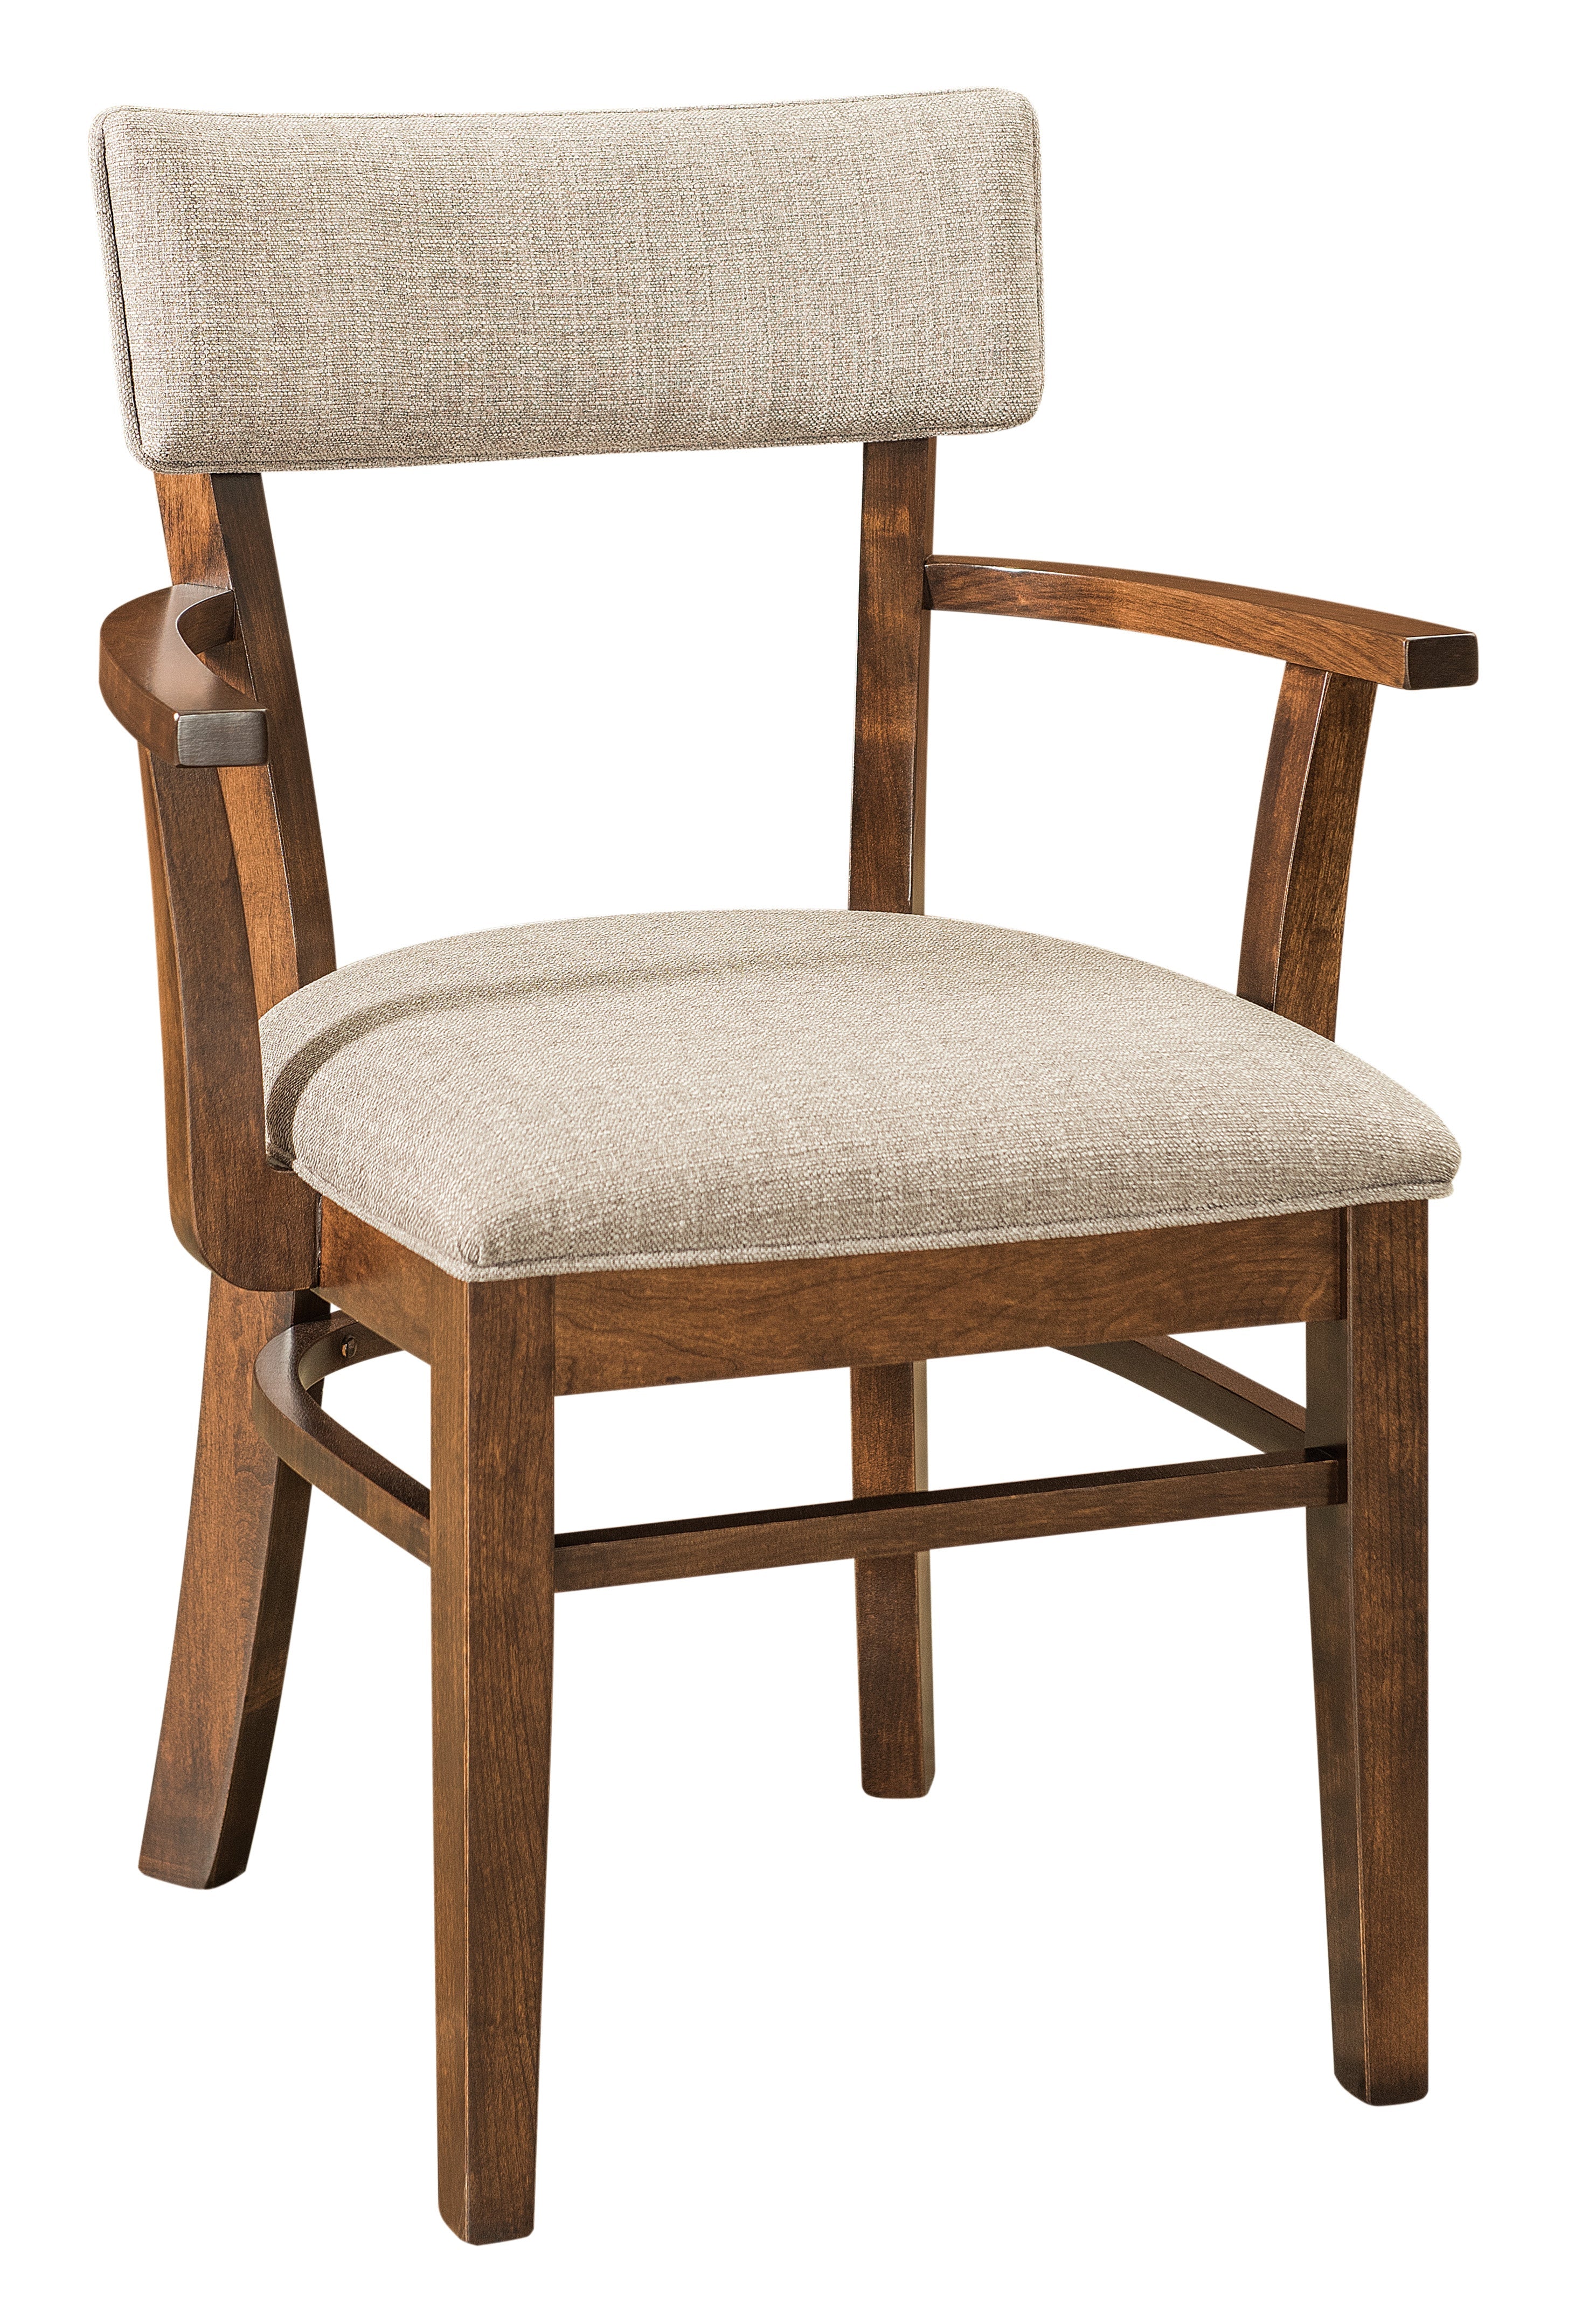 emerson arm chair in cherry with earthtone stain and canal fabric